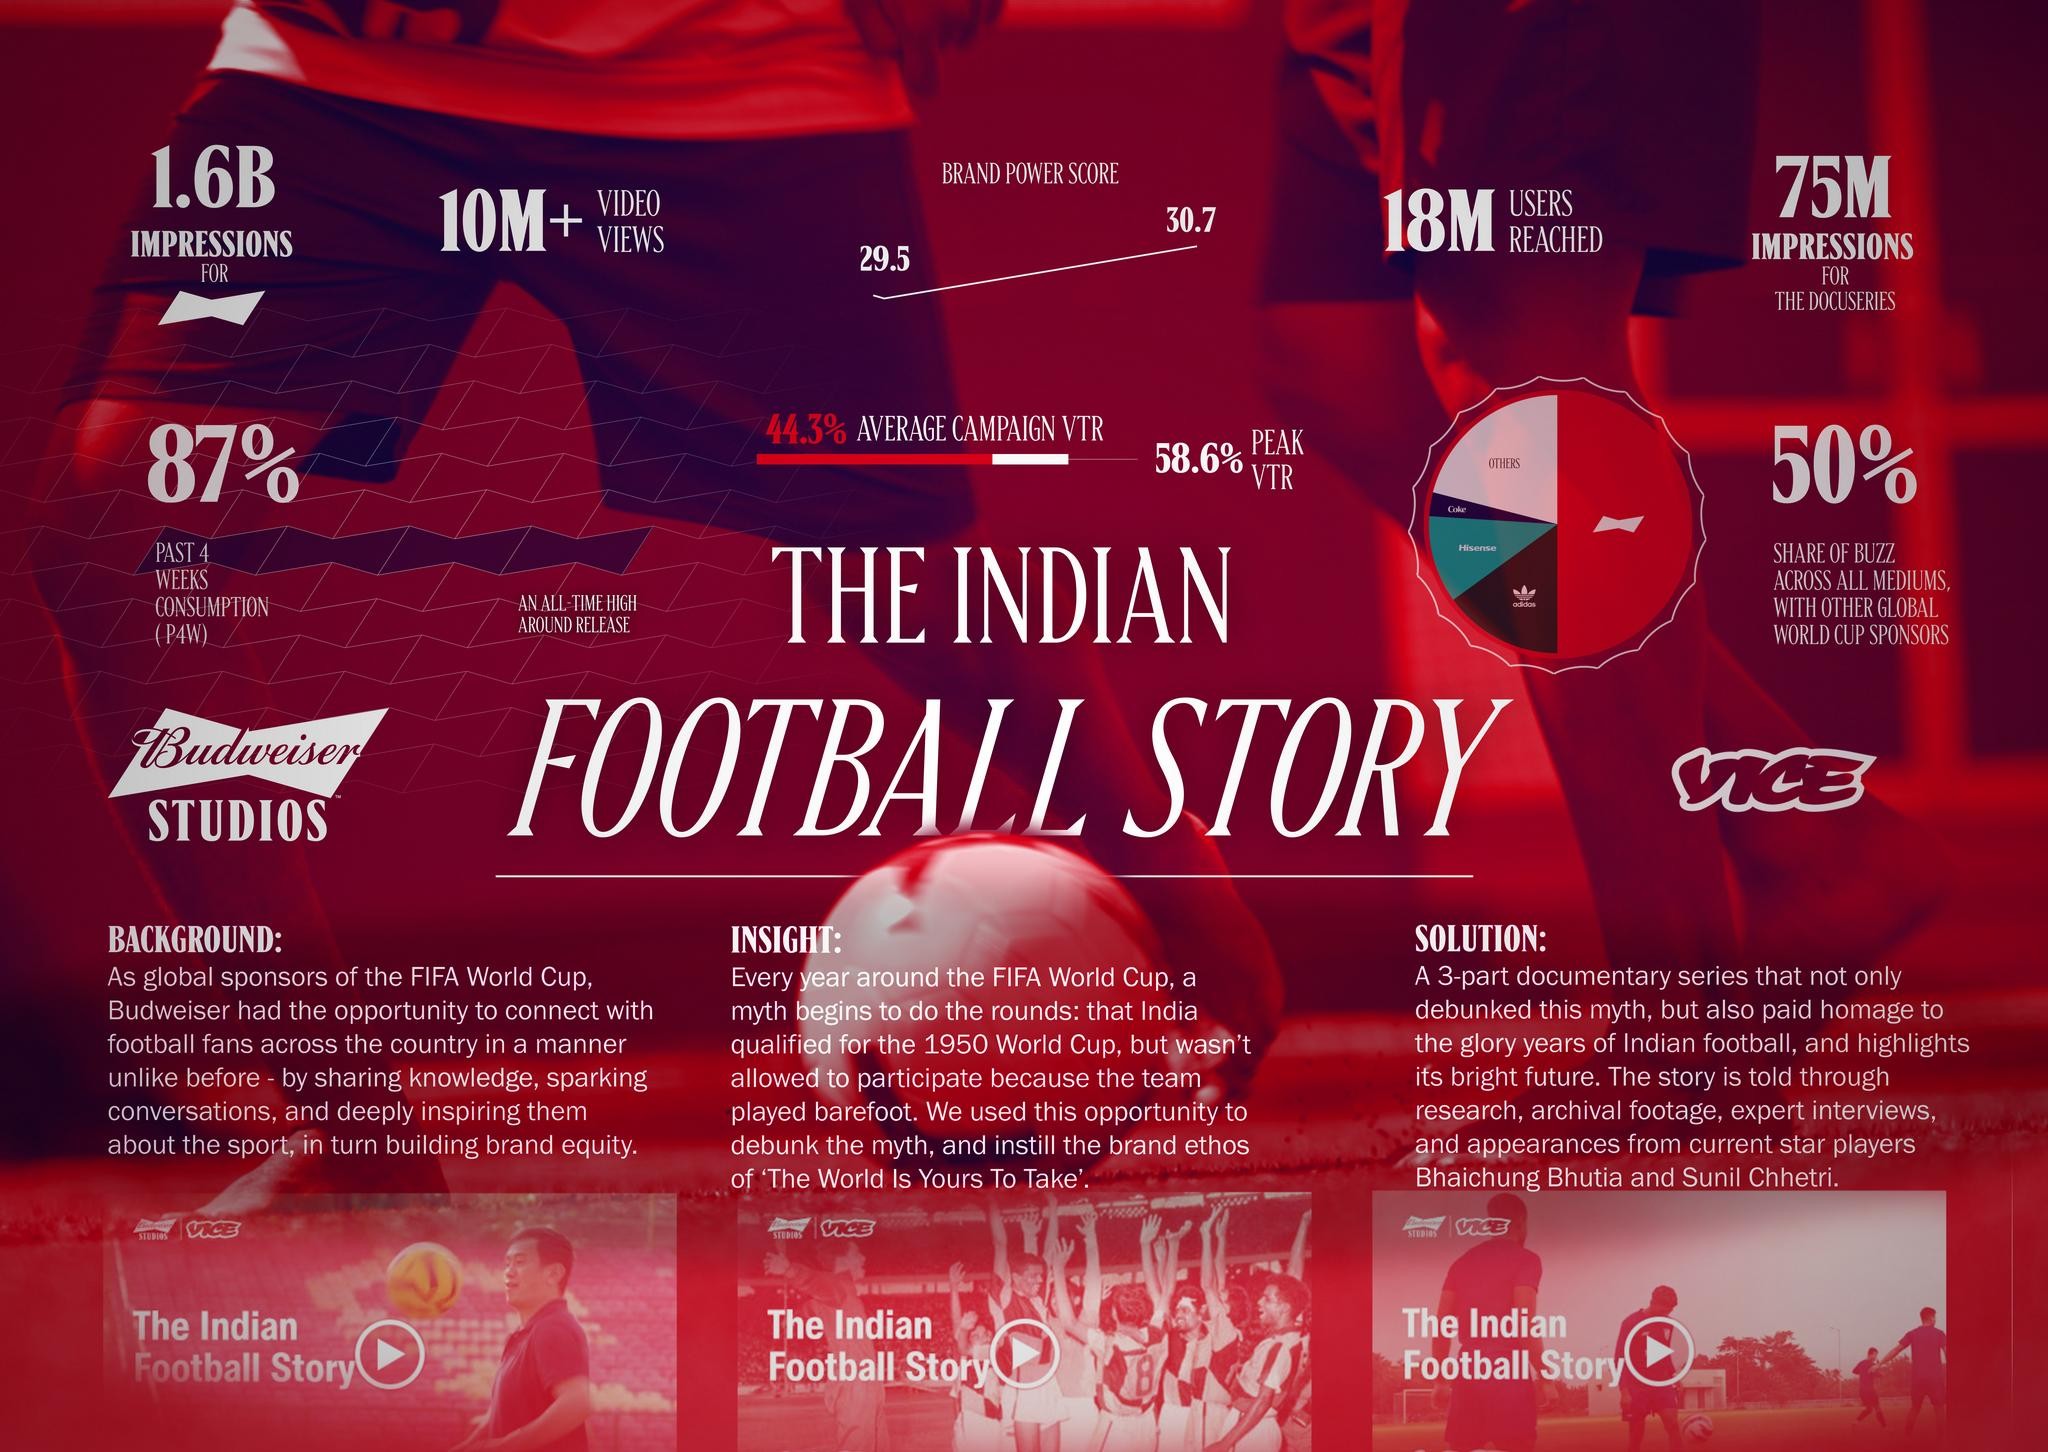 The Indian Football Story